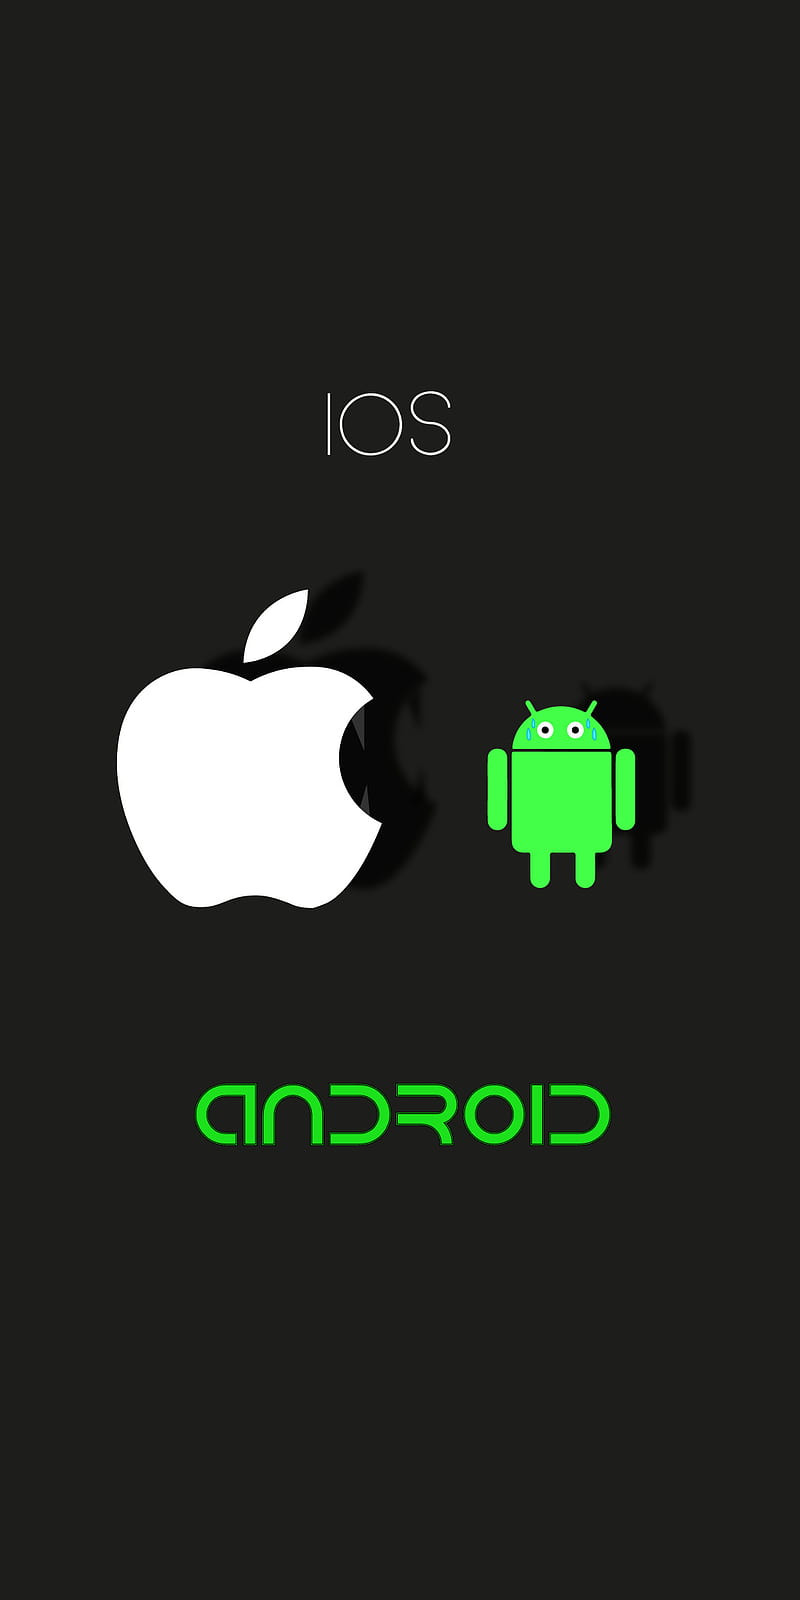 Ios Vs Android Apple Huawei Iphone Loading Oneplus Samsung Hd Mobile Wallpaper Peakpx